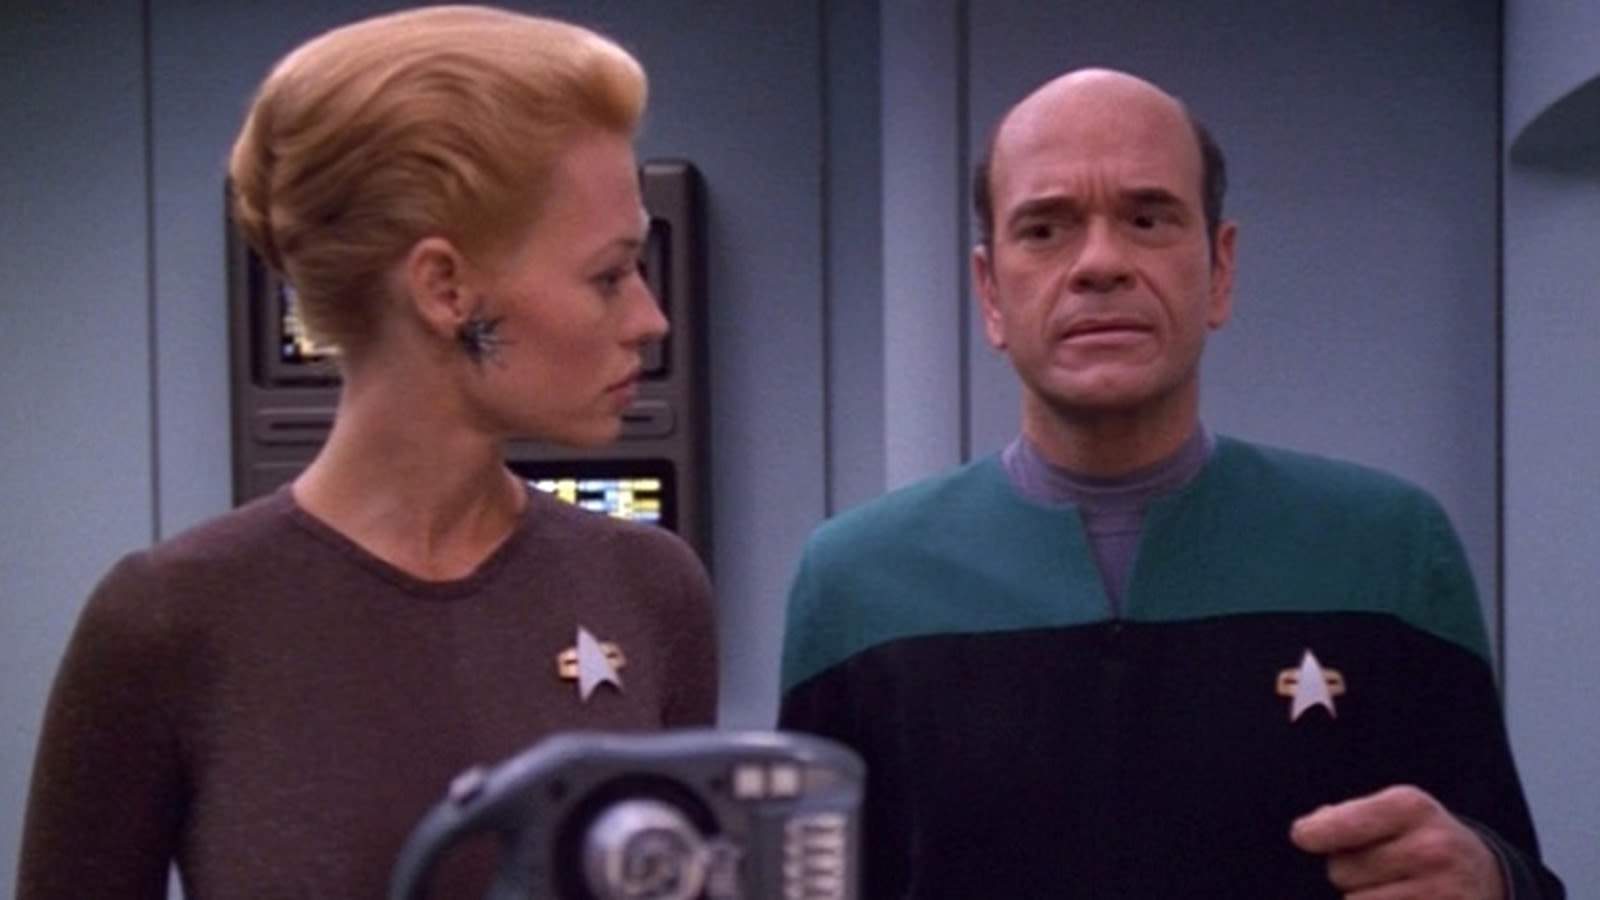 The Male Cast Members Of Star Trek: Voyager Had One Complaint About The Doctor - SlashFilm